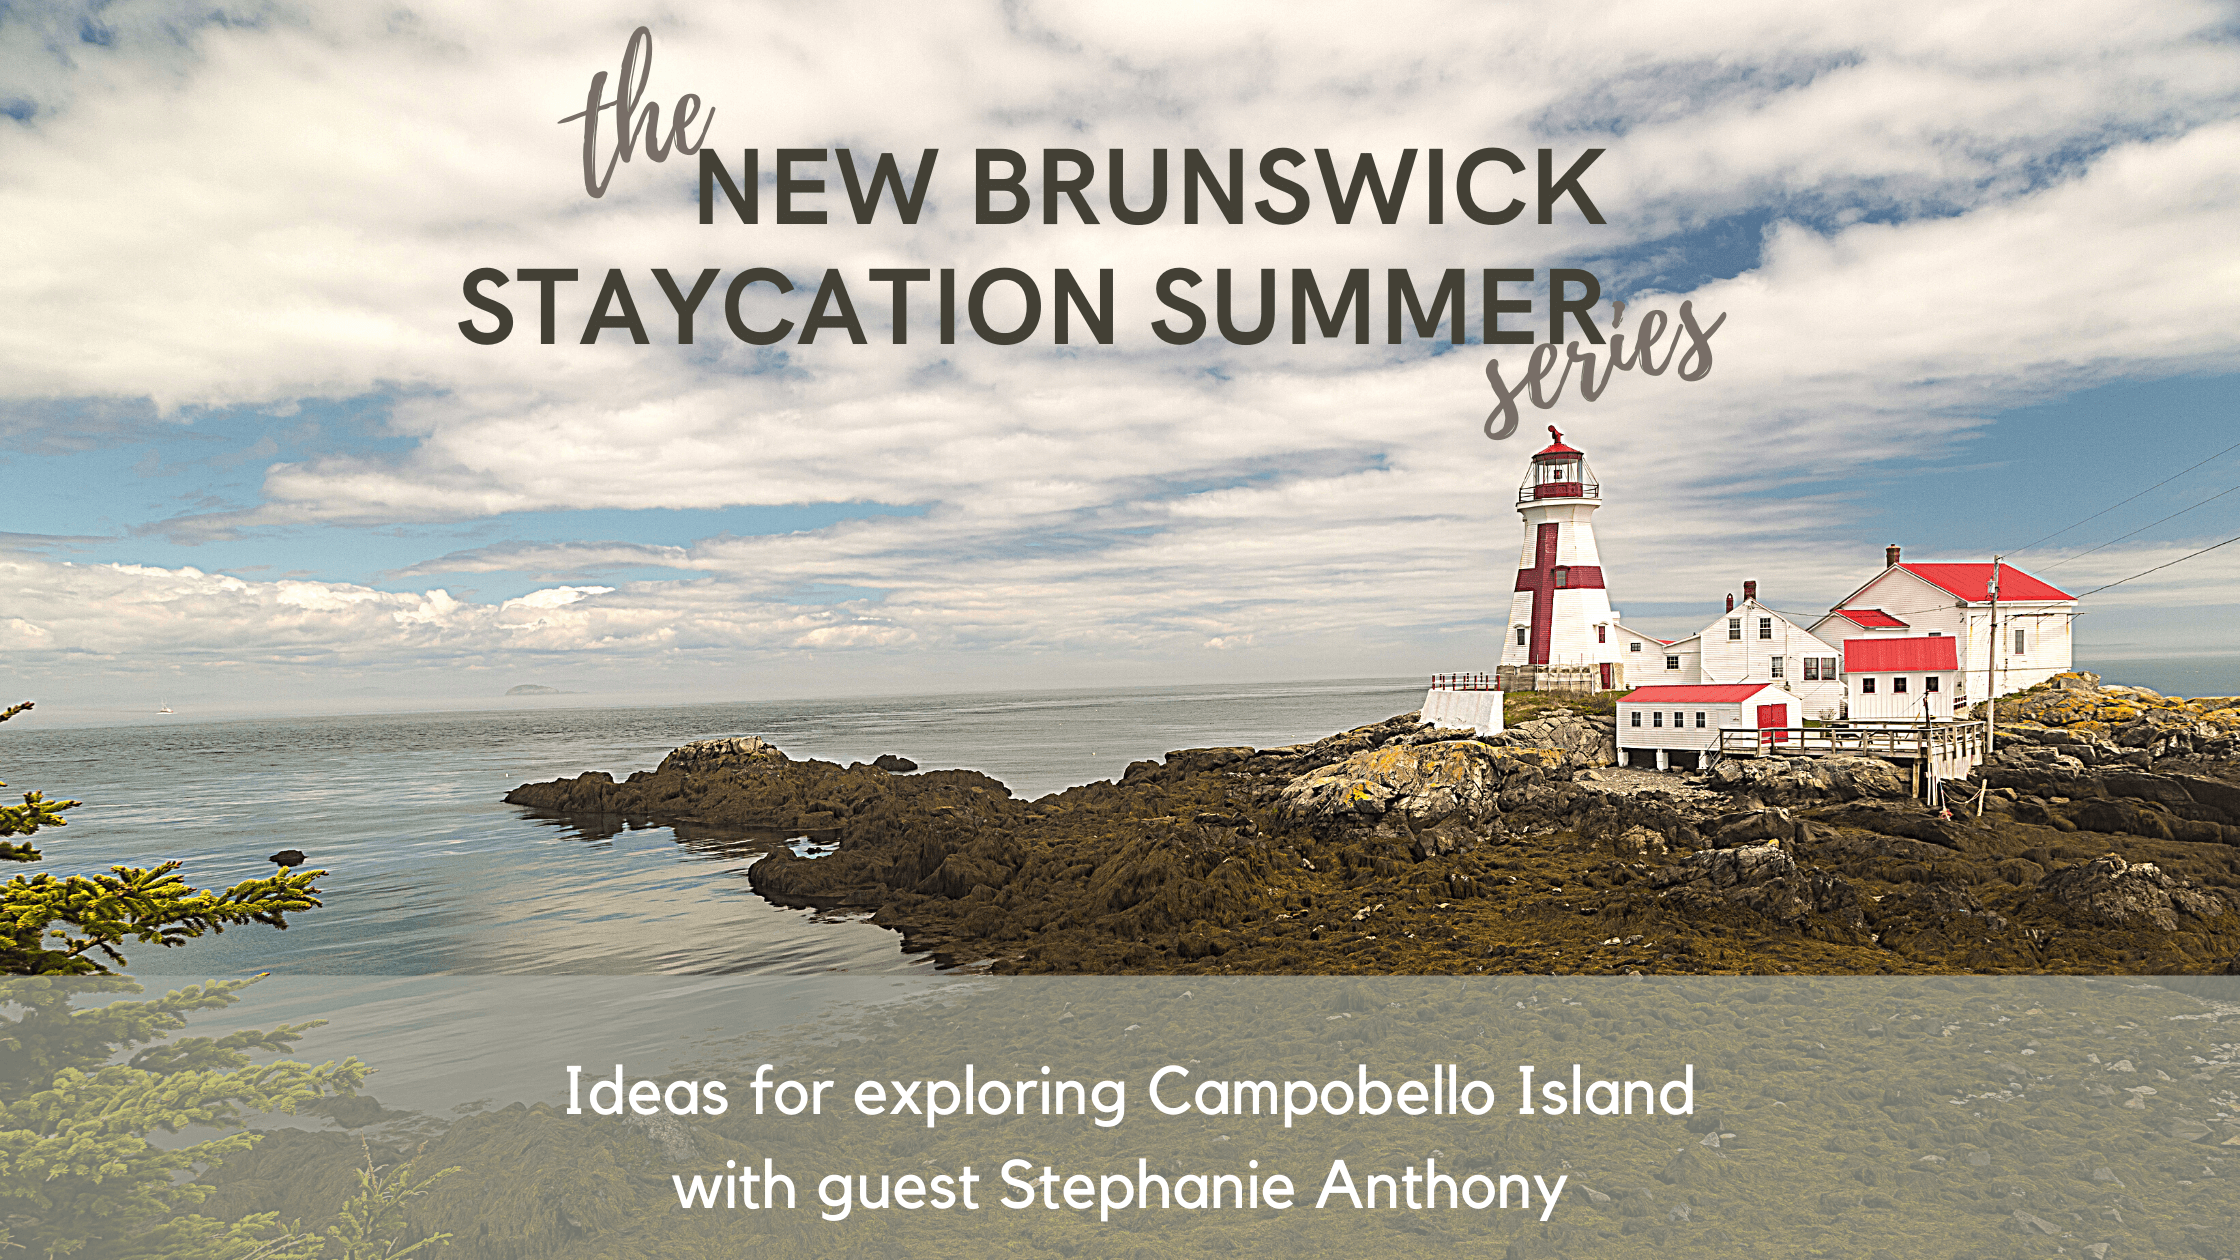 campobello island staycation ideas new brunswick summer vacation podcast pickle planet travel tourism